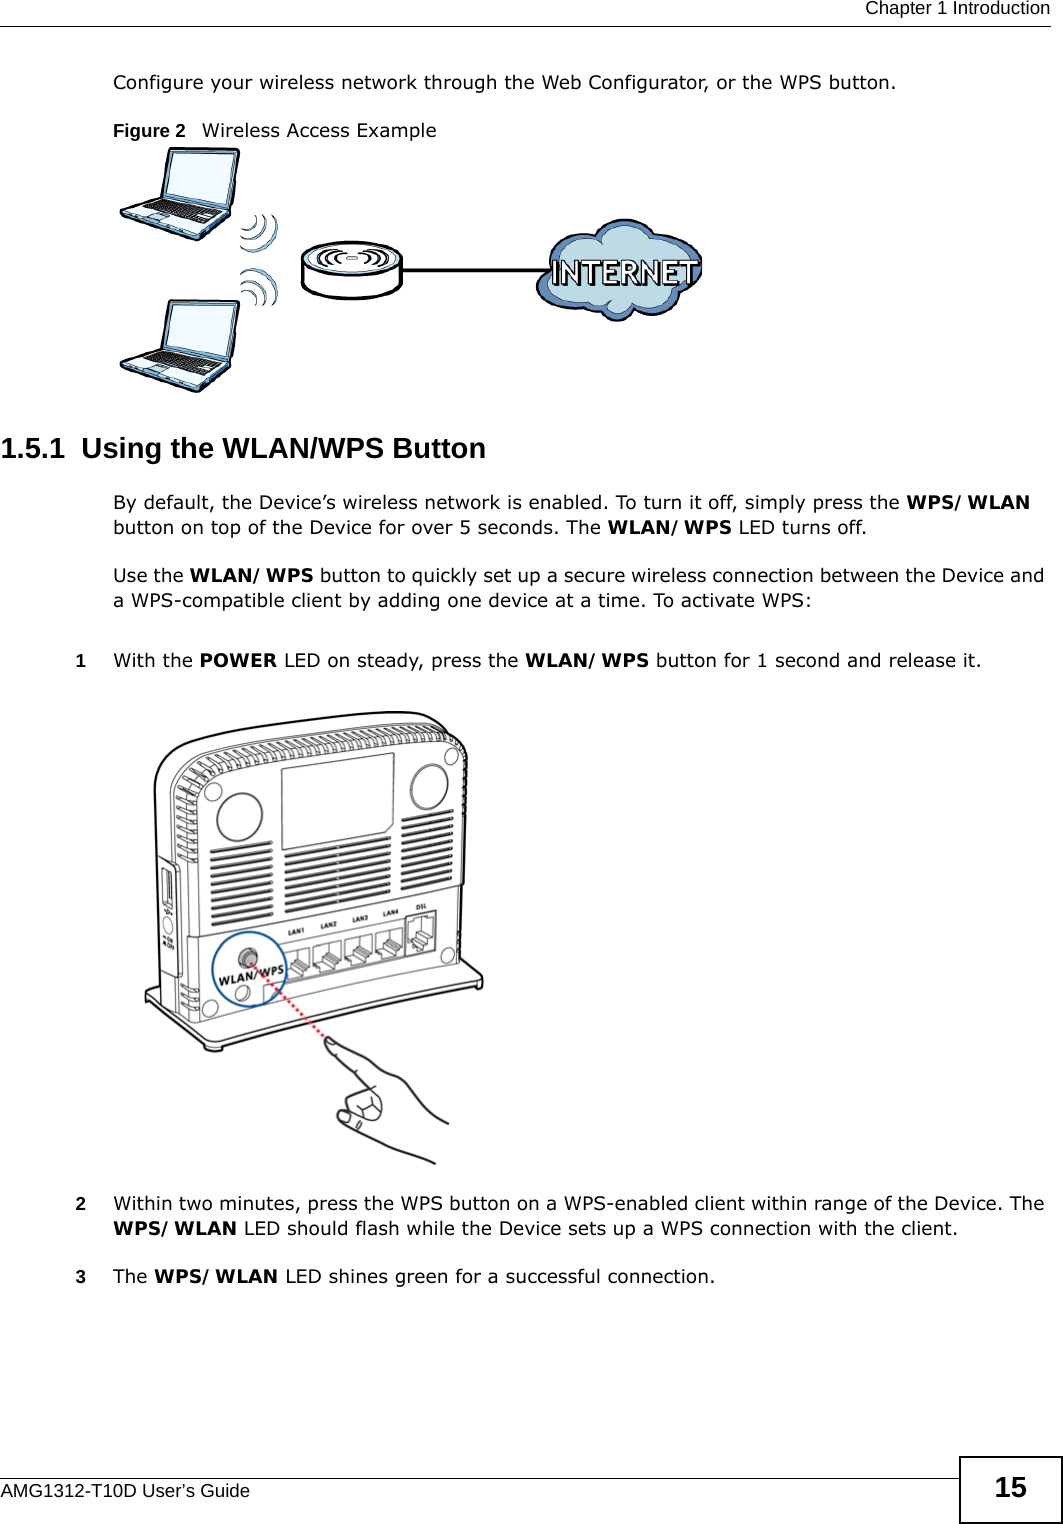  Chapter 1 IntroductionAMG1312-T10D User’s Guide 15Configure your wireless network through the Web Configurator, or the WPS button.Figure 2   Wireless Access Example1.5.1  Using the WLAN/WPS ButtonBy default, the Device’s wireless network is enabled. To turn it off, simply press the WPS/WLAN button on top of the Device for over 5 seconds. The WLAN/WPS LED turns off.Use the WLAN/WPS button to quickly set up a secure wireless connection between the Device and a WPS-compatible client by adding one device at a time. To activate WPS:1With the POWER LED on steady, press the WLAN/WPS button for 1 second and release it.  2Within two minutes, press the WPS button on a WPS-enabled client within range of the Device. The WPS/WLAN LED should flash while the Device sets up a WPS connection with the client. 3The WPS/WLAN LED shines green for a successful connection.